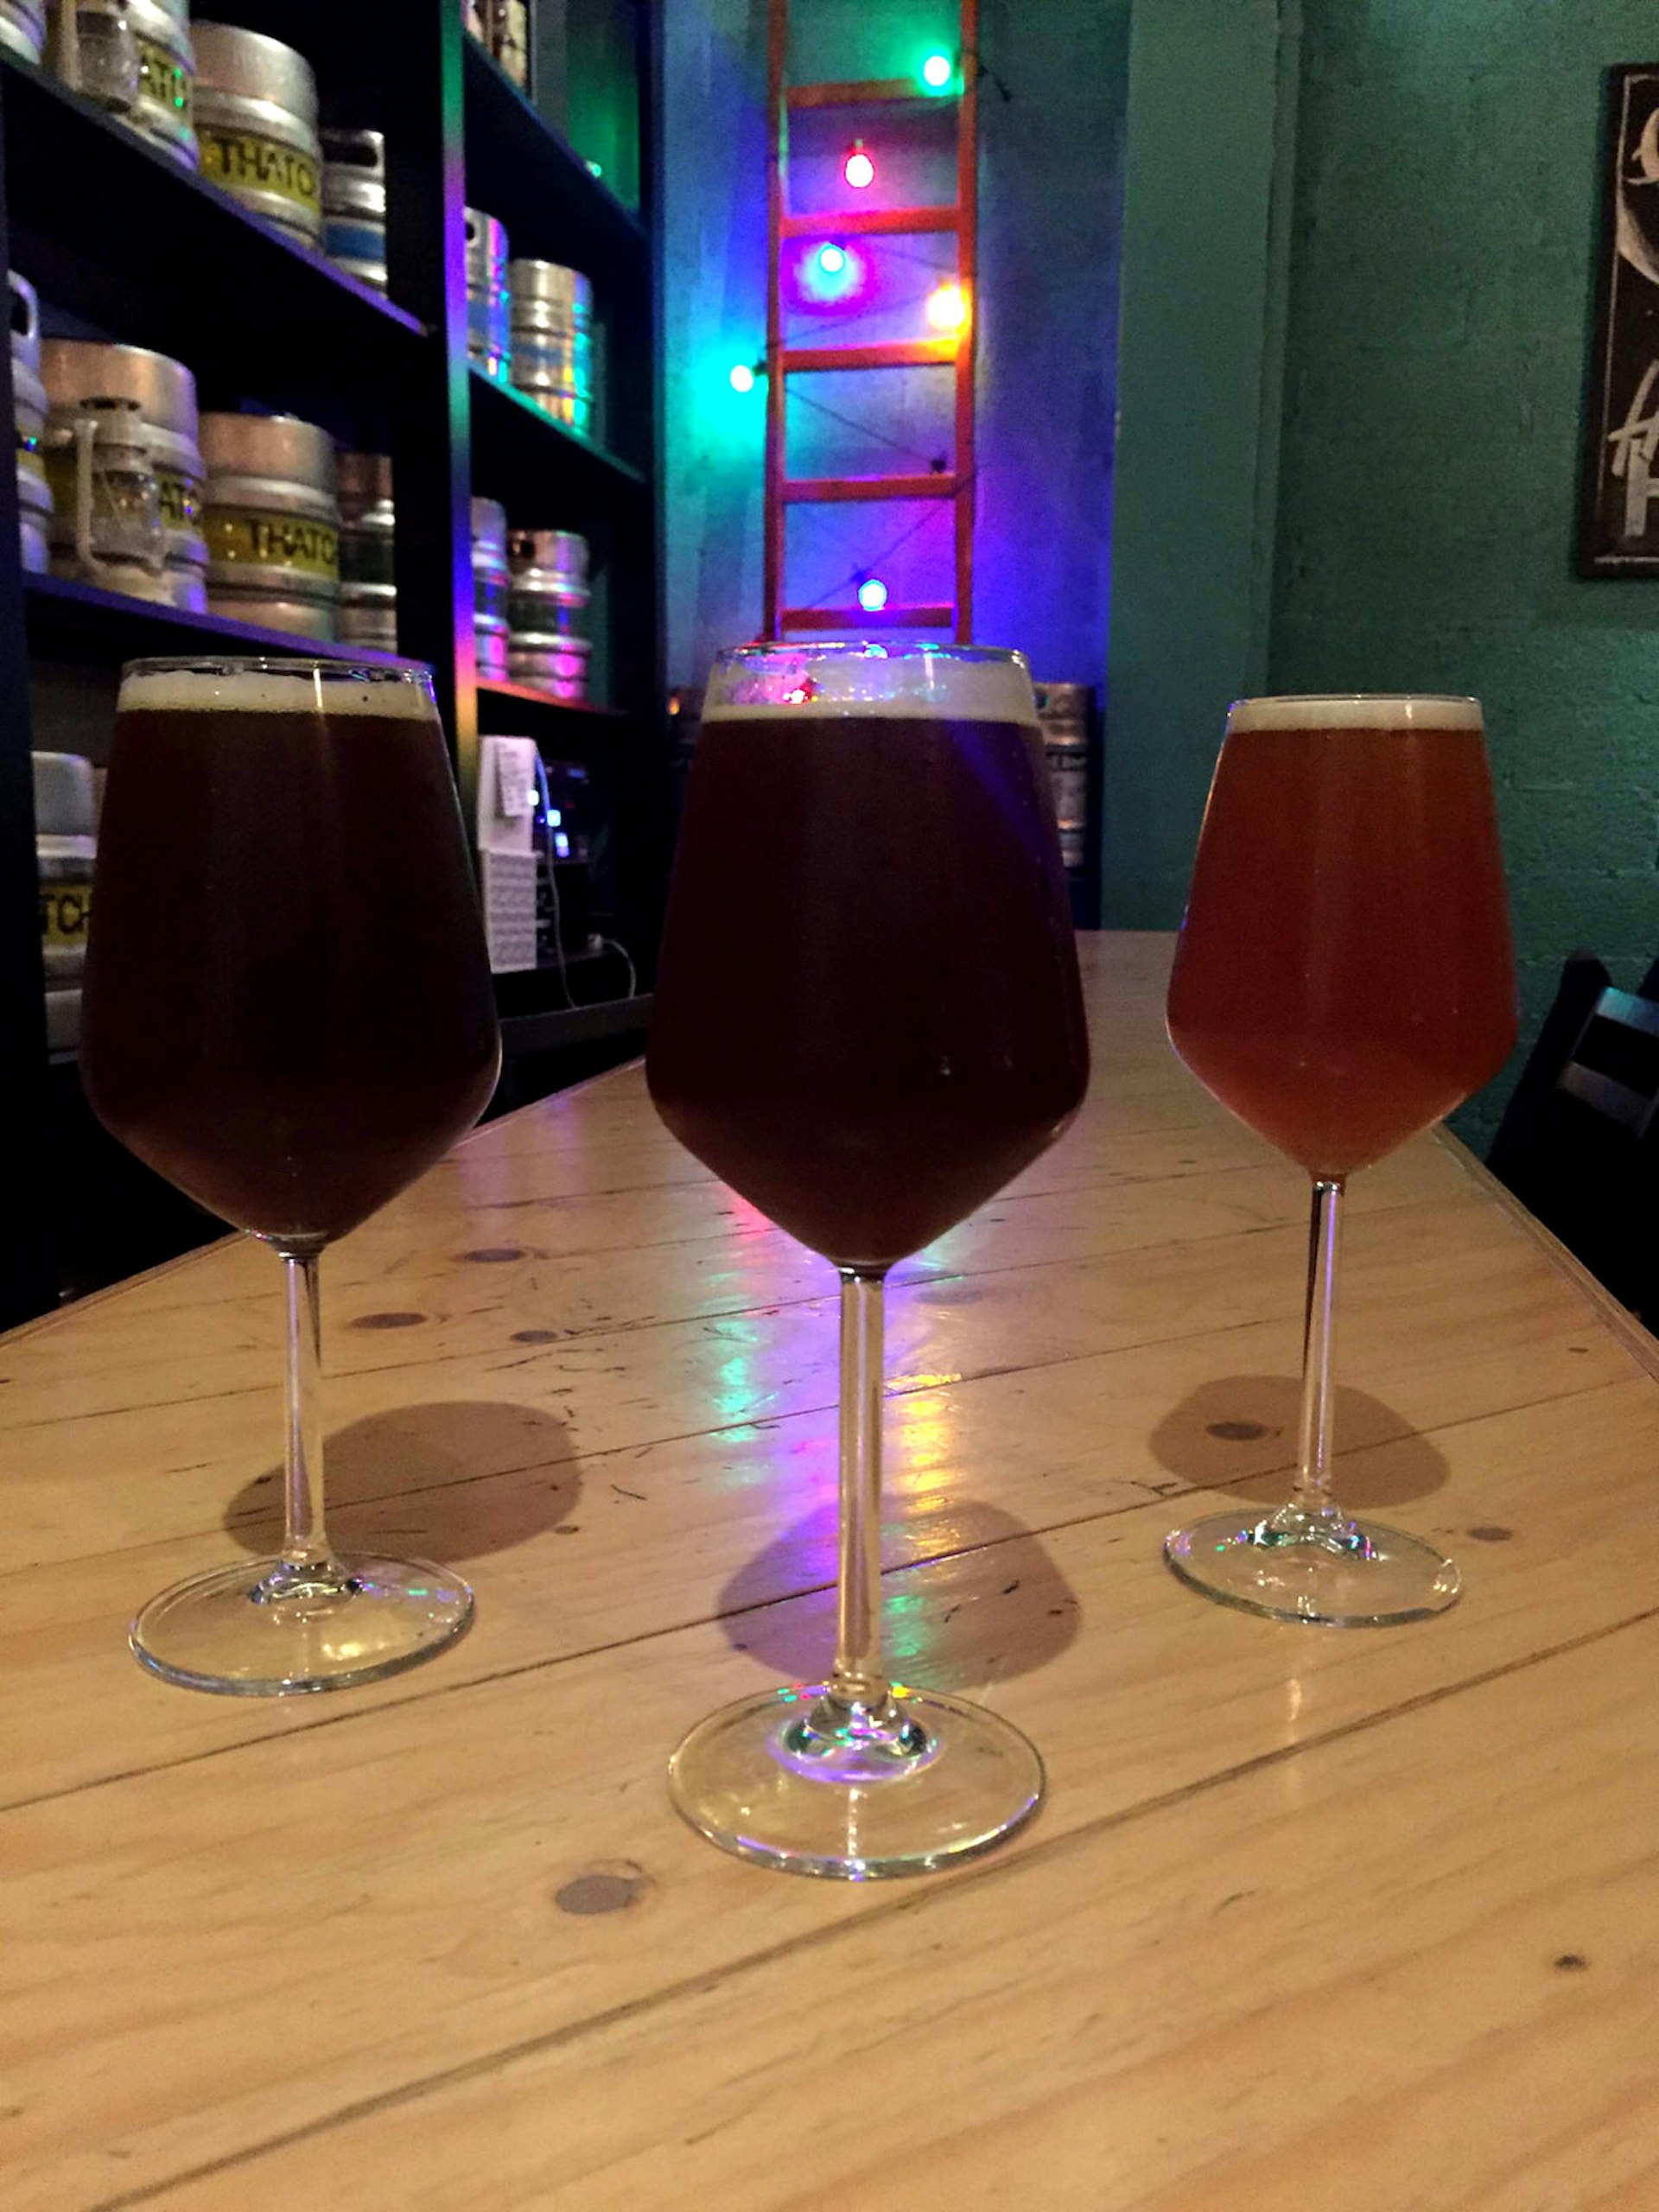 Three glasses of different coloured beers on a table in front of shelves of beer kegs and rainbow lighting